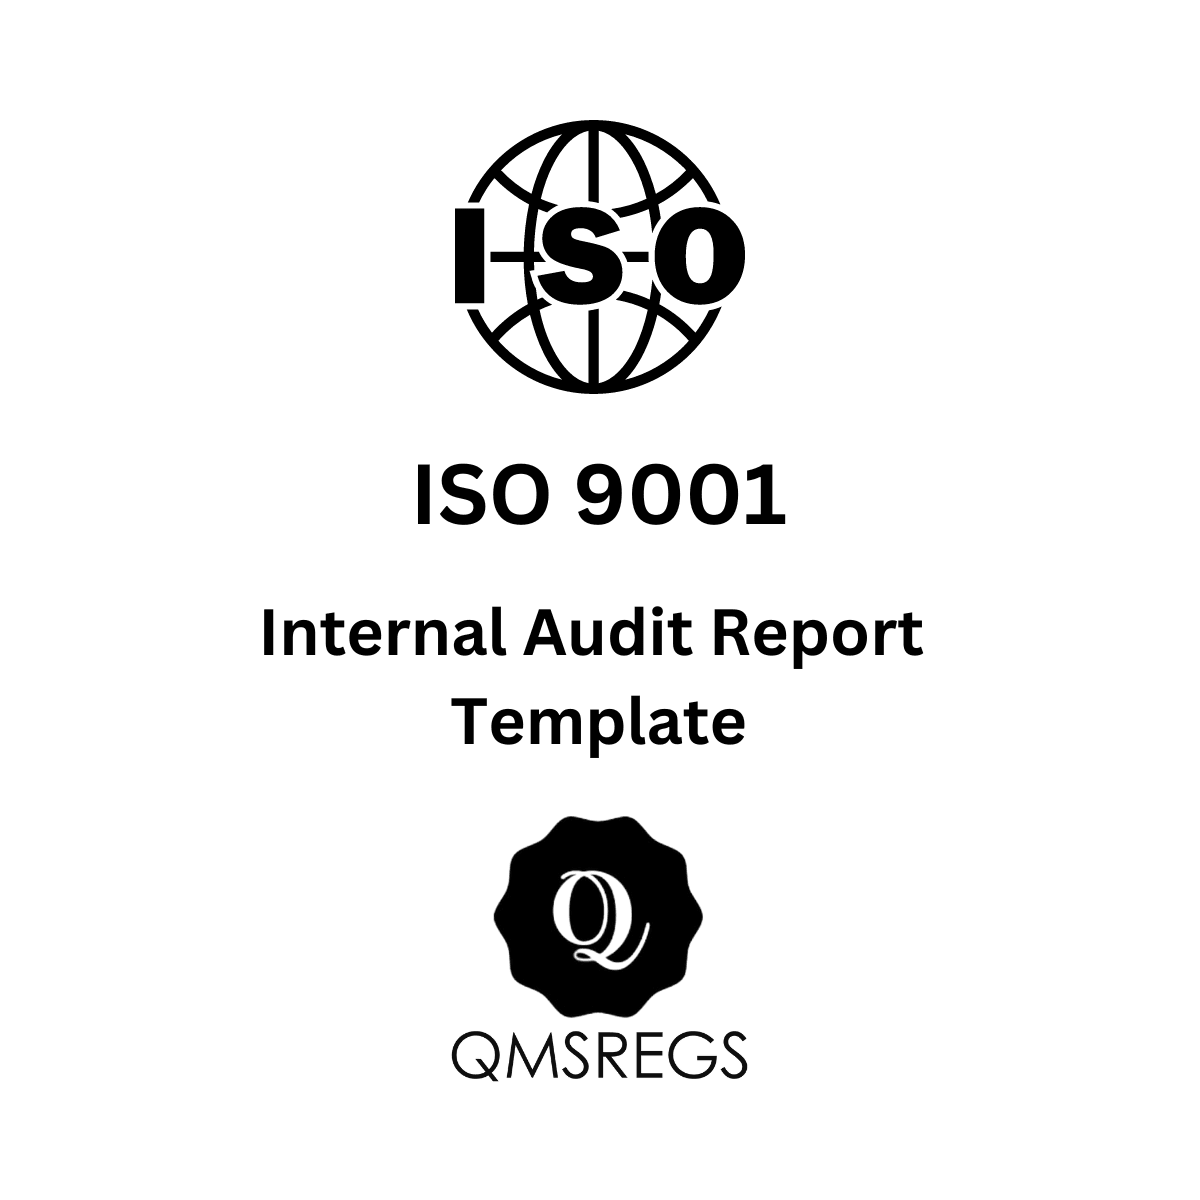 ISO 9001 Internal Audit Report Template